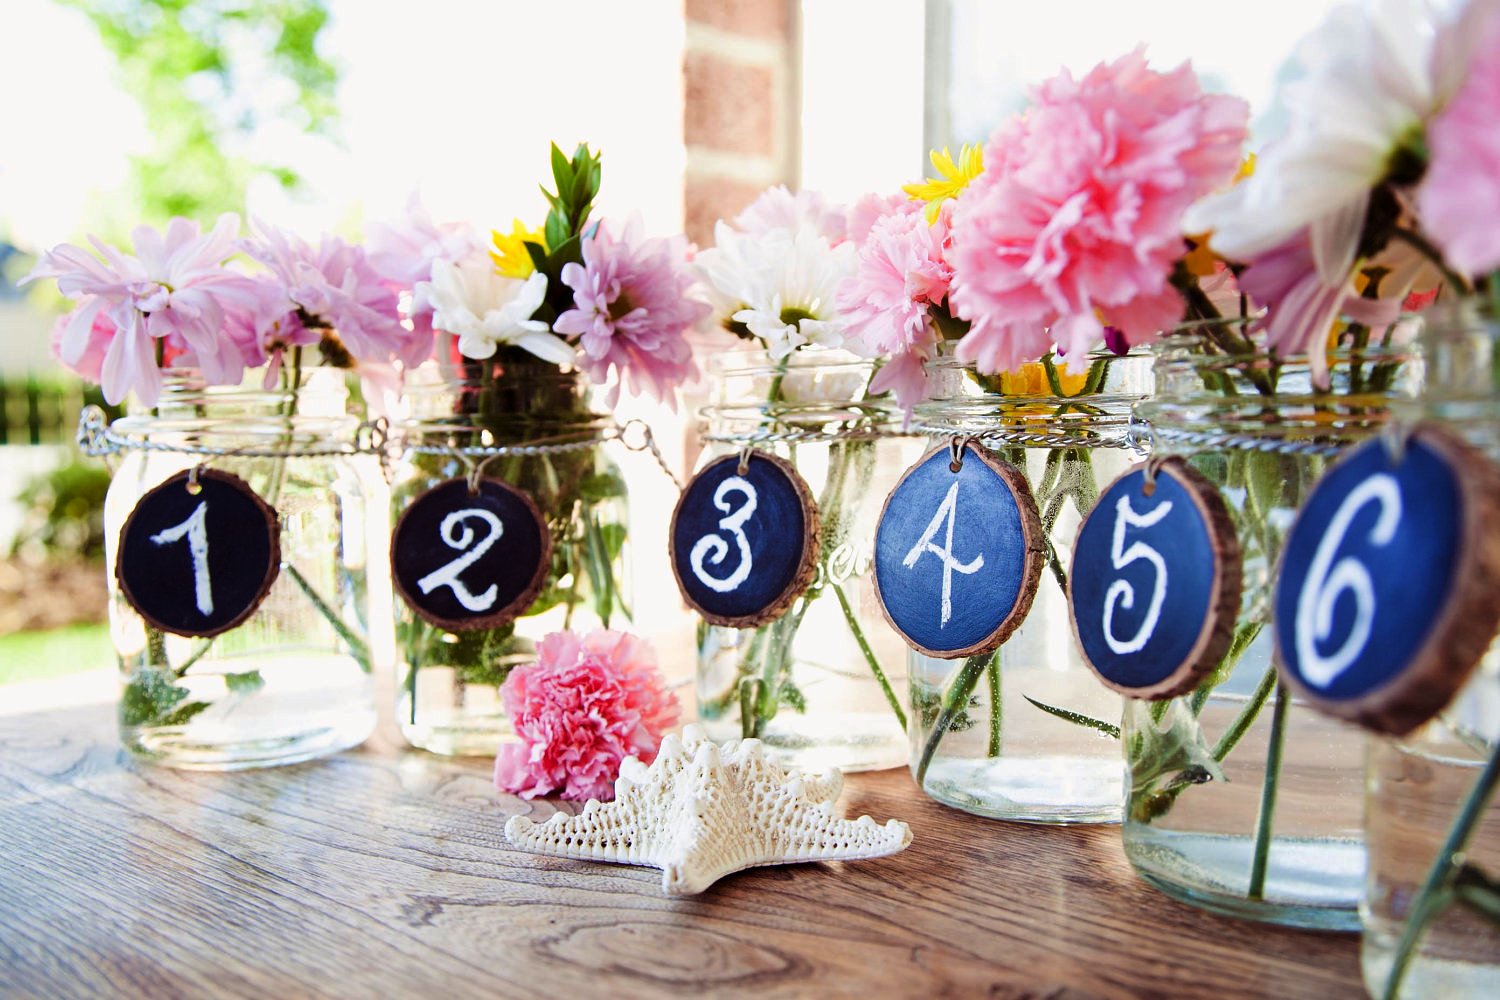 Vintage Inspired Southern Wedding Decorations